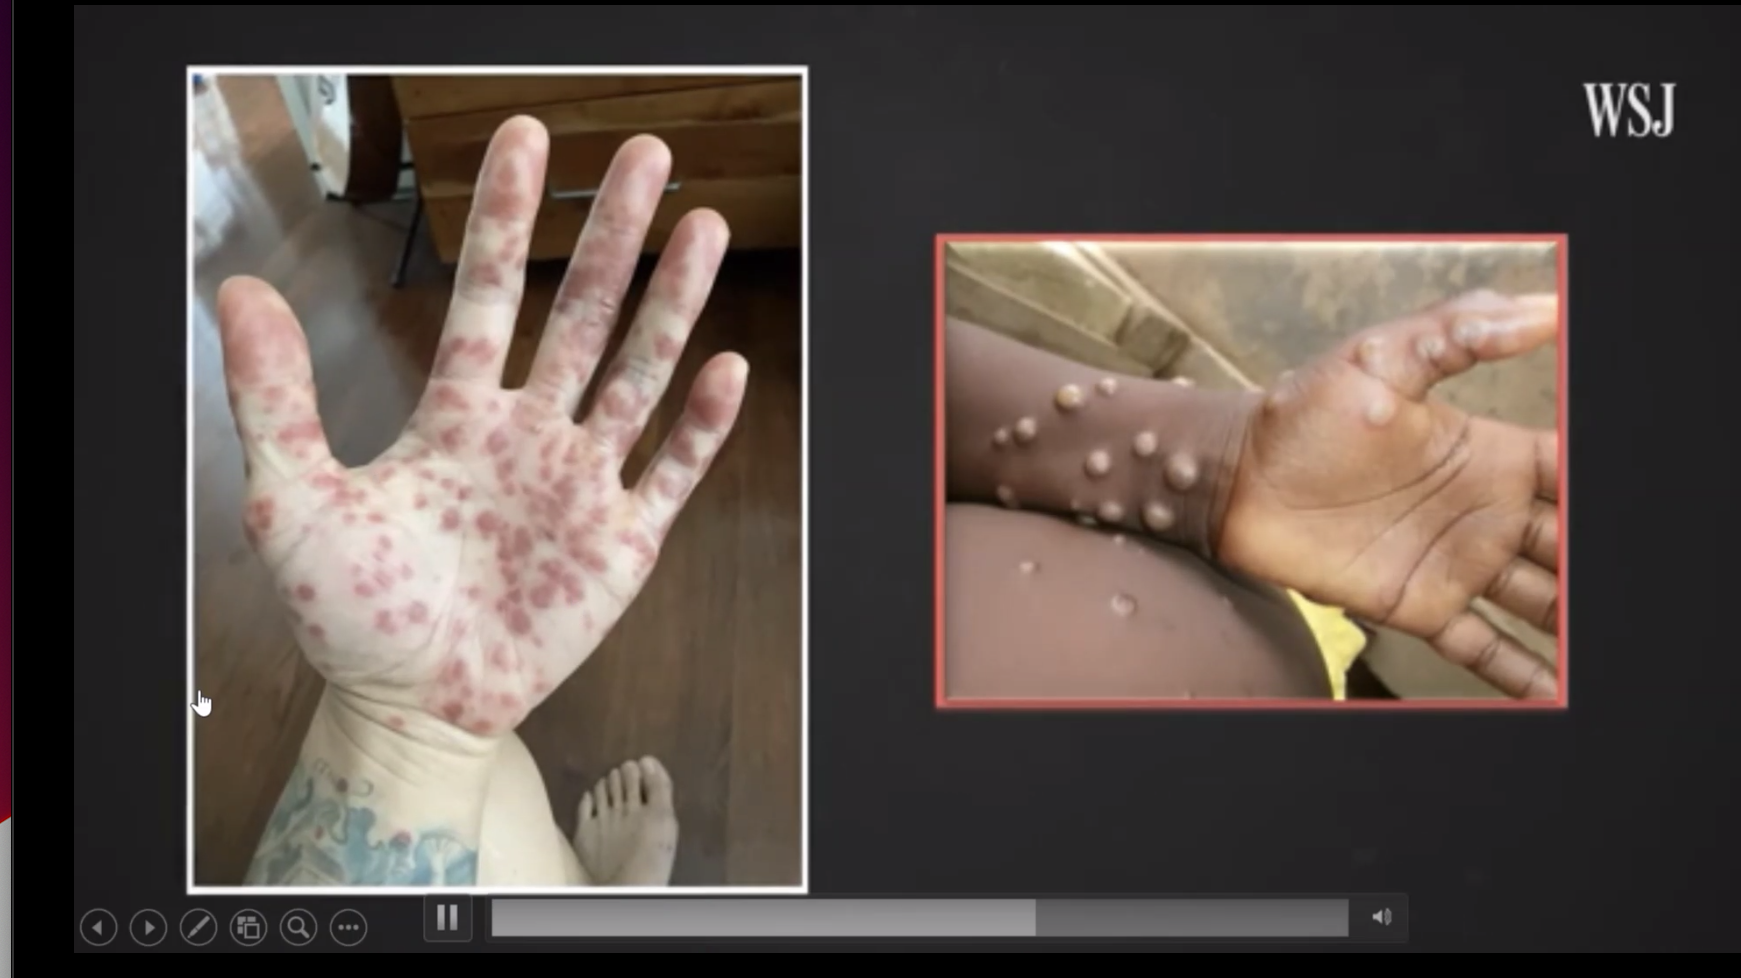 Monkeypox, which produces a rash that starts out as flat red bumps that become fluid-filled lesions, is unusual in that the rash can occur on the palms of the hands and the soles of the feet. (Screenshot from webinar presentation)